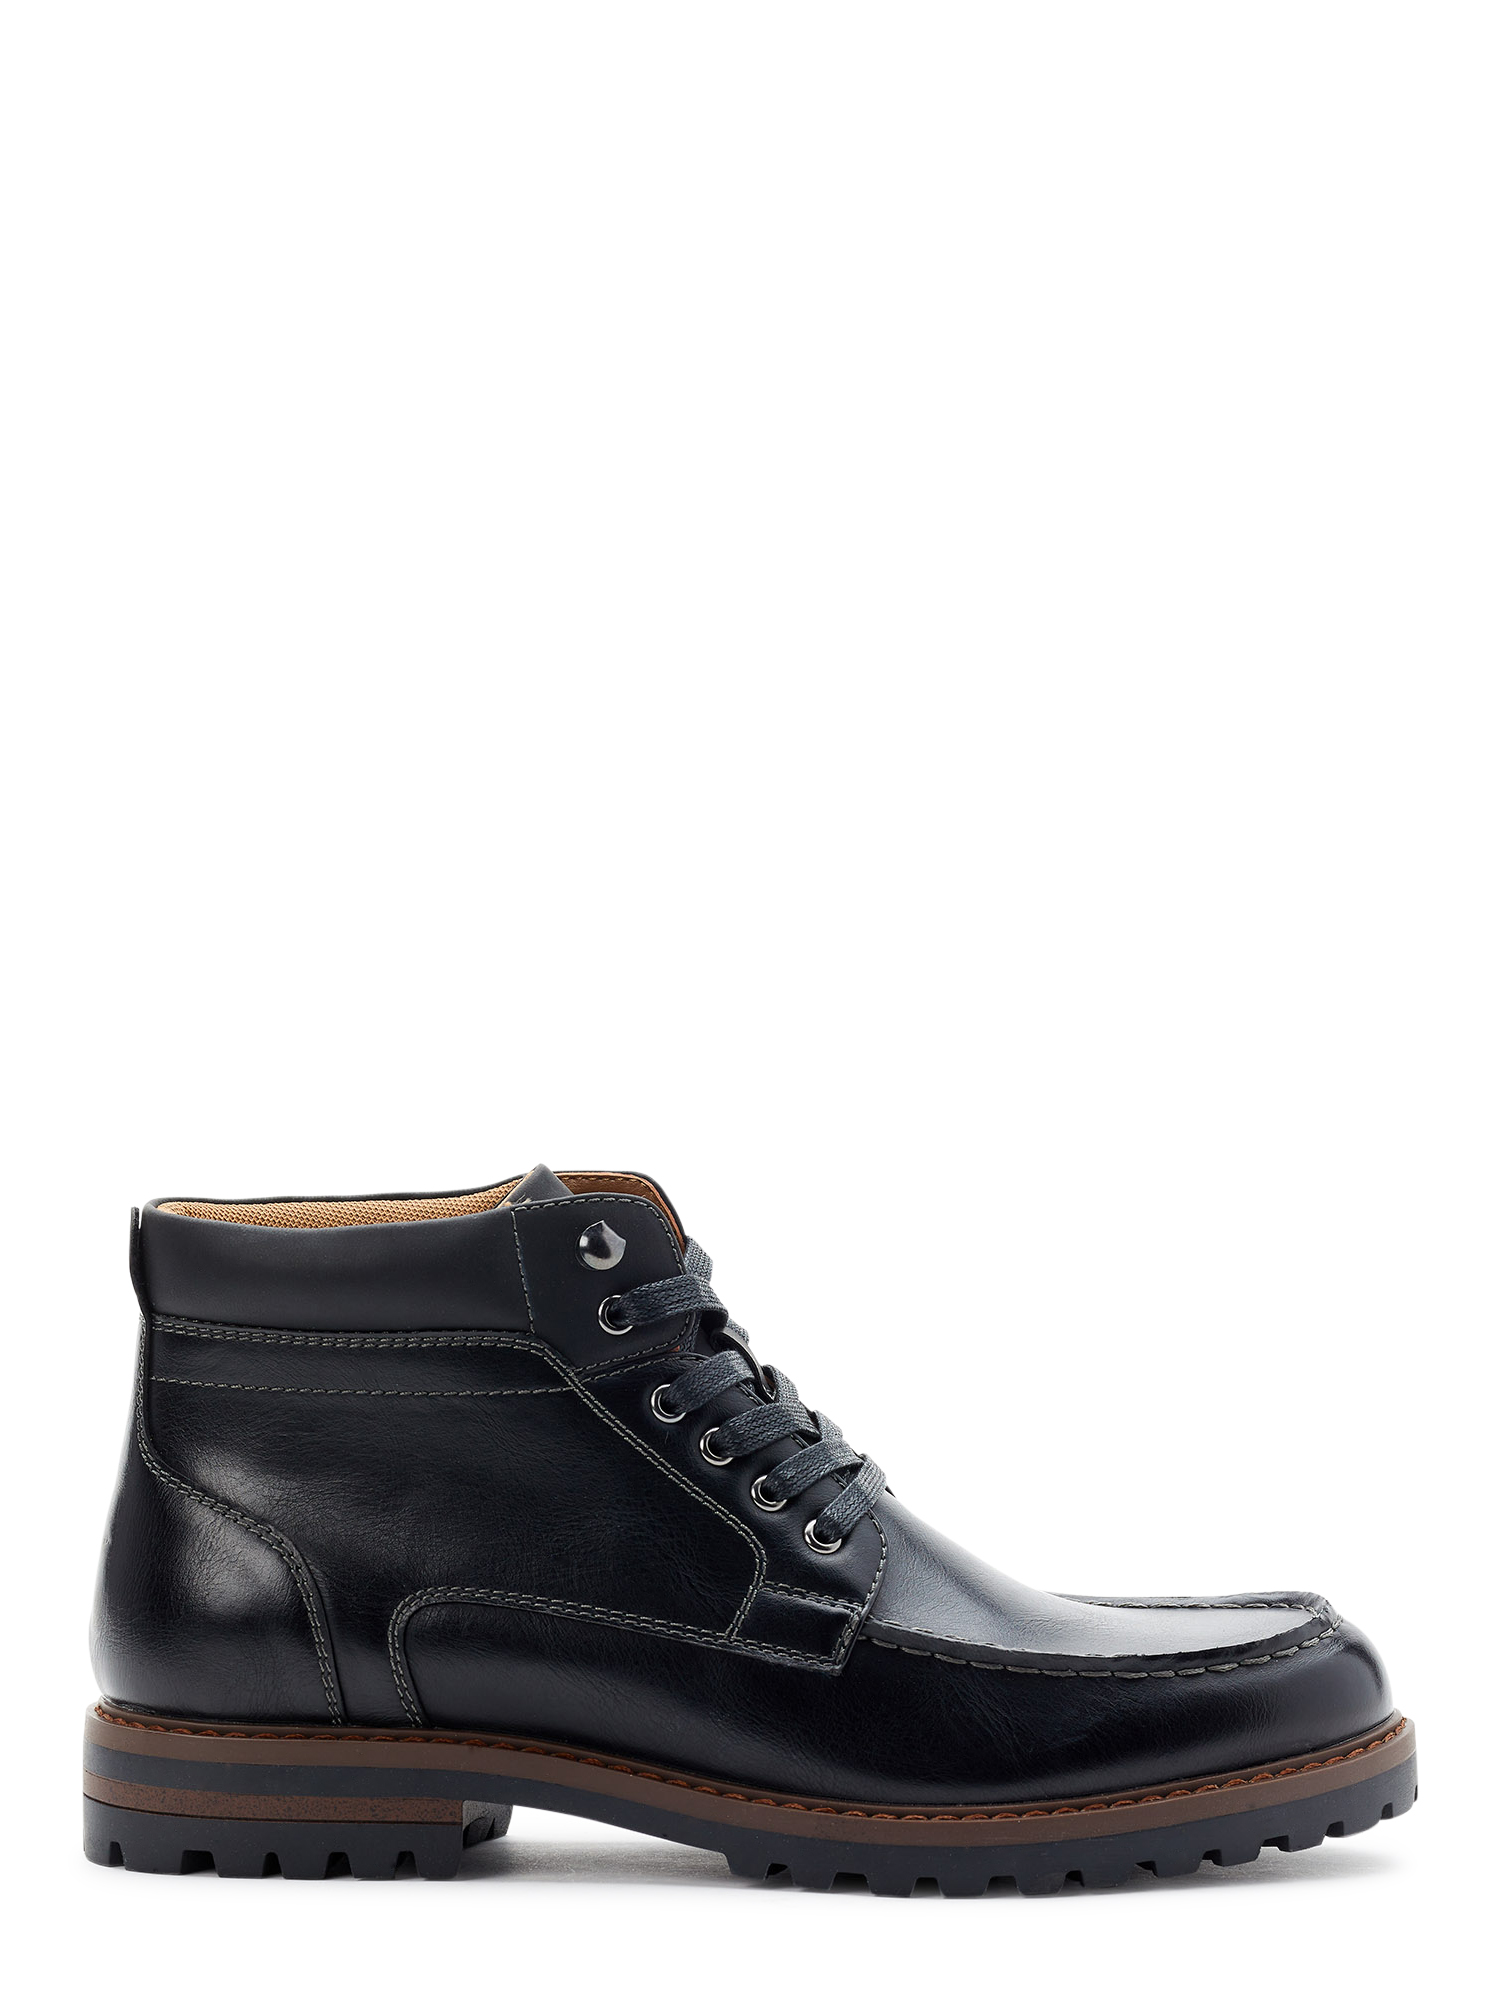 Madden NYC Men's Tristen Lug Sole Moc Toe Boots - image 2 of 5